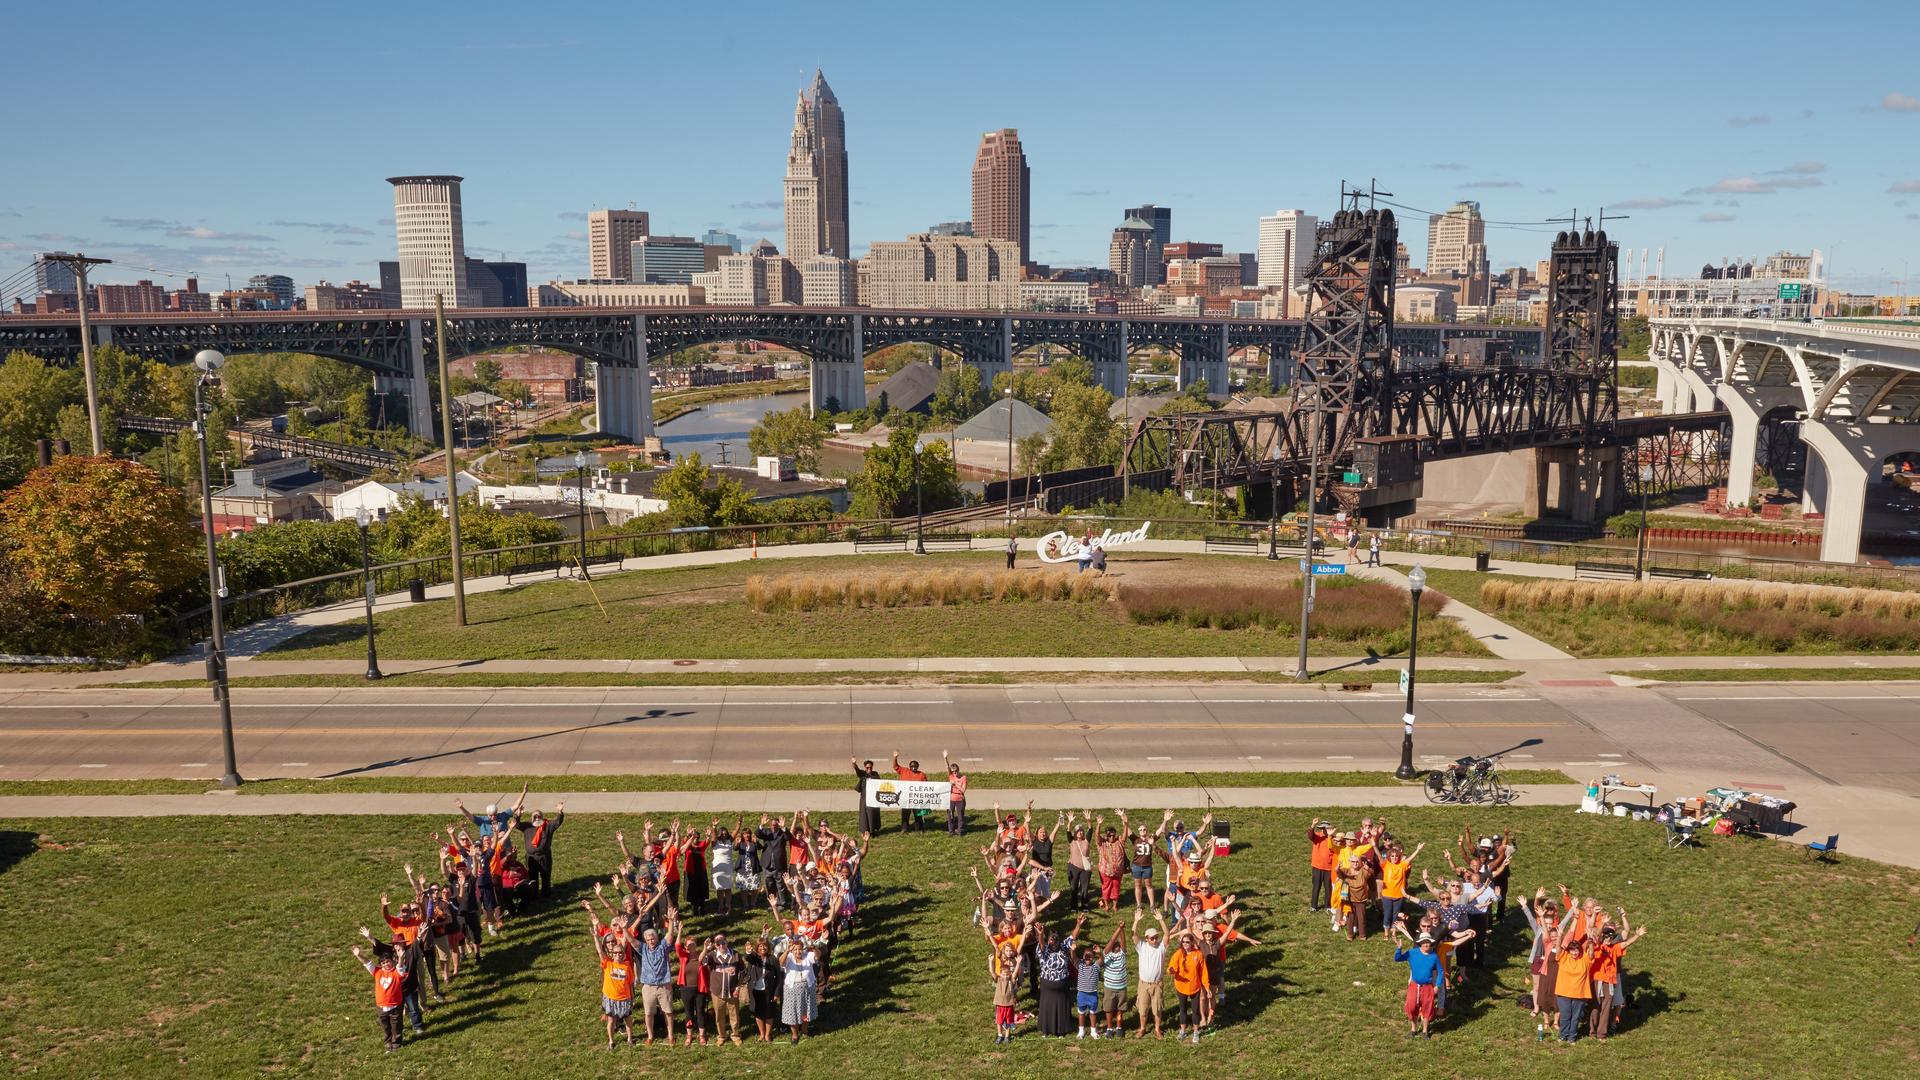 The Sierra Club is organizing grassroots activists to push Cleveland’s city leaders to commit to 100 percent renewable energy by the year 2050. 